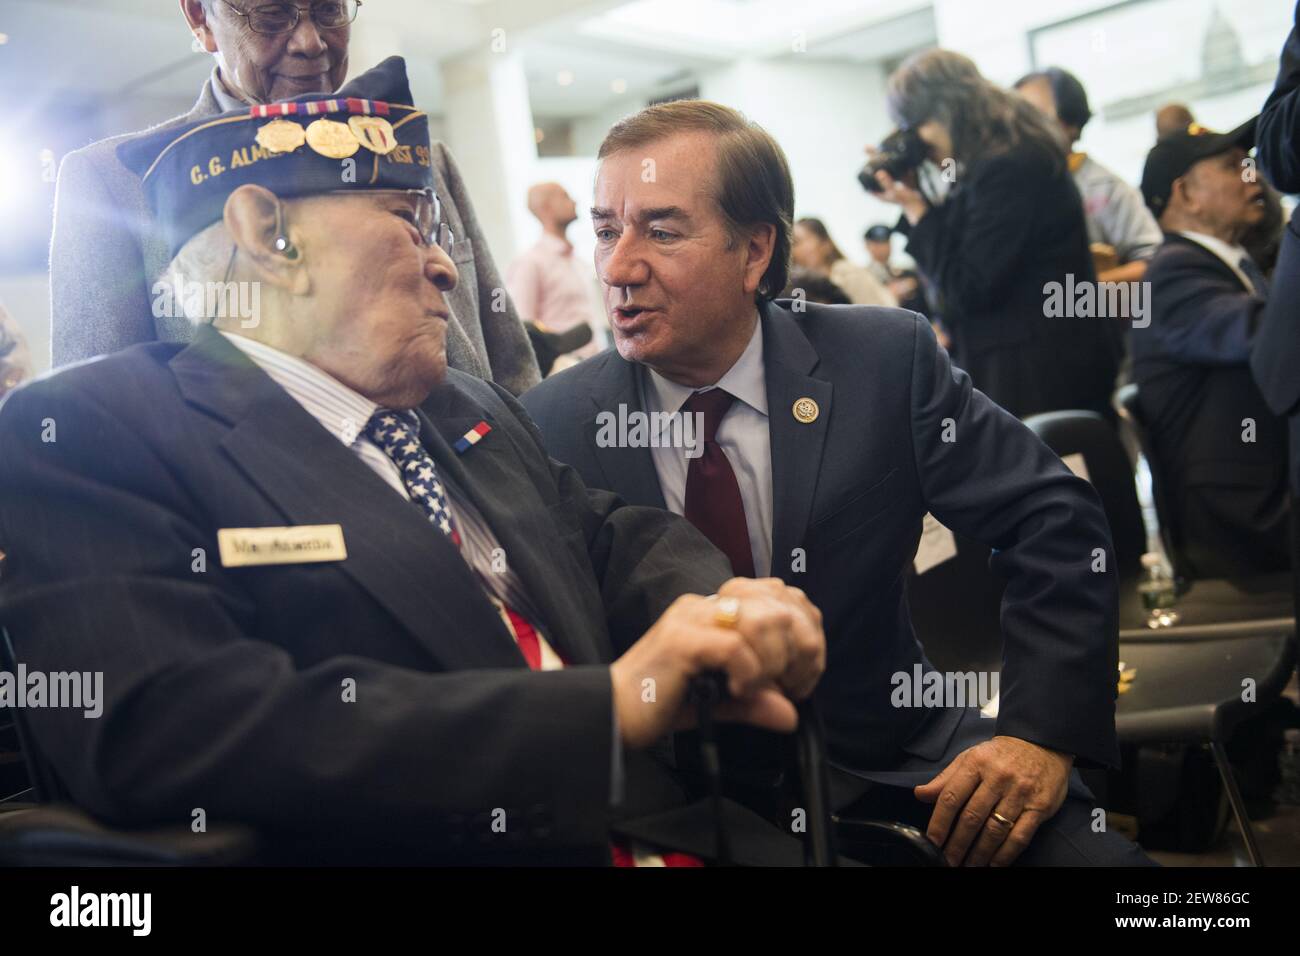 UNITED STATES - OCTOBER 25: Rep. Ed Royce, R-Calif., talks with Celestino Almeda, a veteran representing the Philippine Commonwealth Army, during a Congressional Gold Medal ceremony in Emancipation Hall to honor Filipino veterans of World War II on October 25, 2017. (Photo By Tom Williams/CQ Roll Call) Stock Photo